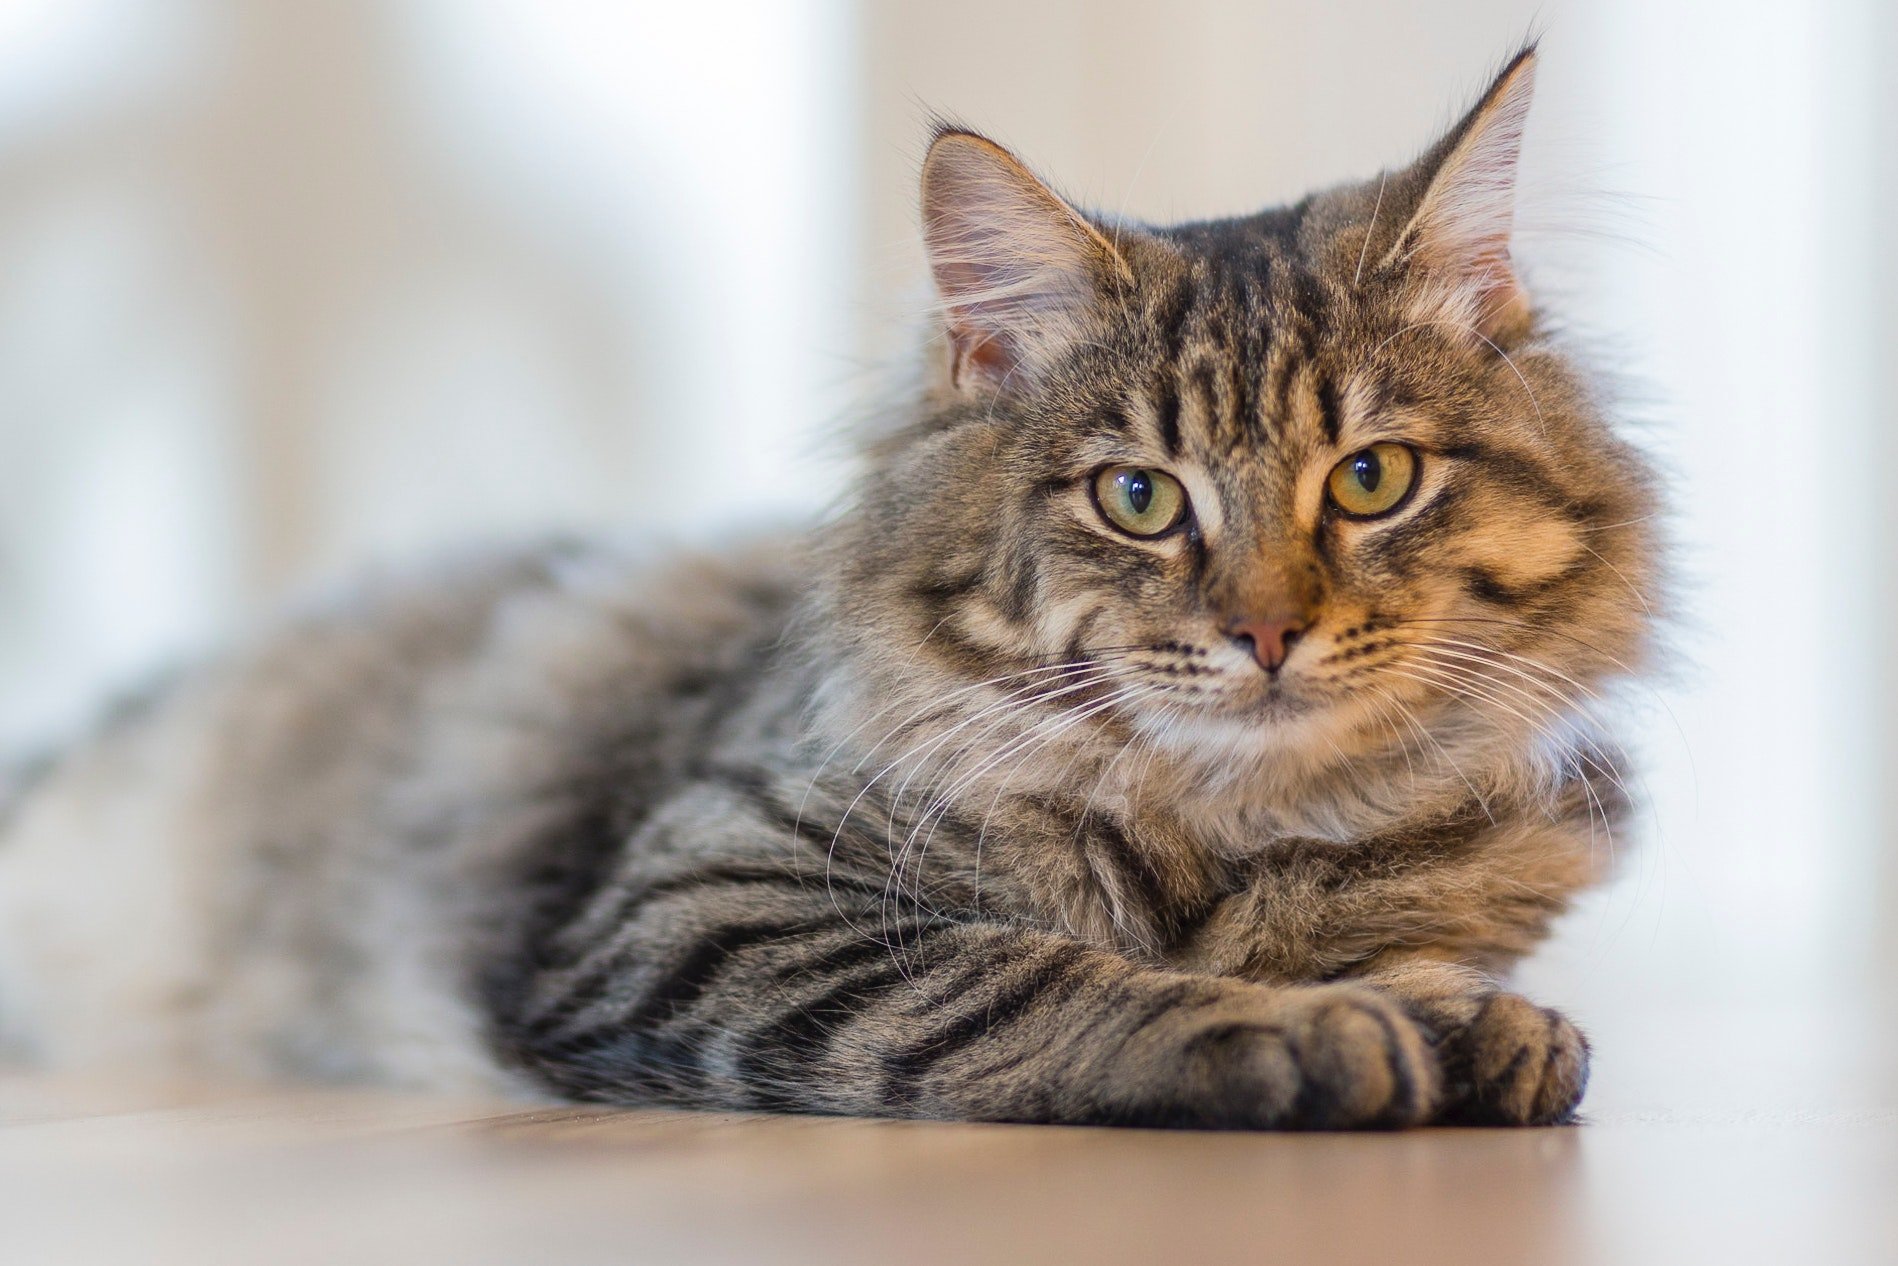 An image of a cat | Photo: Pexels